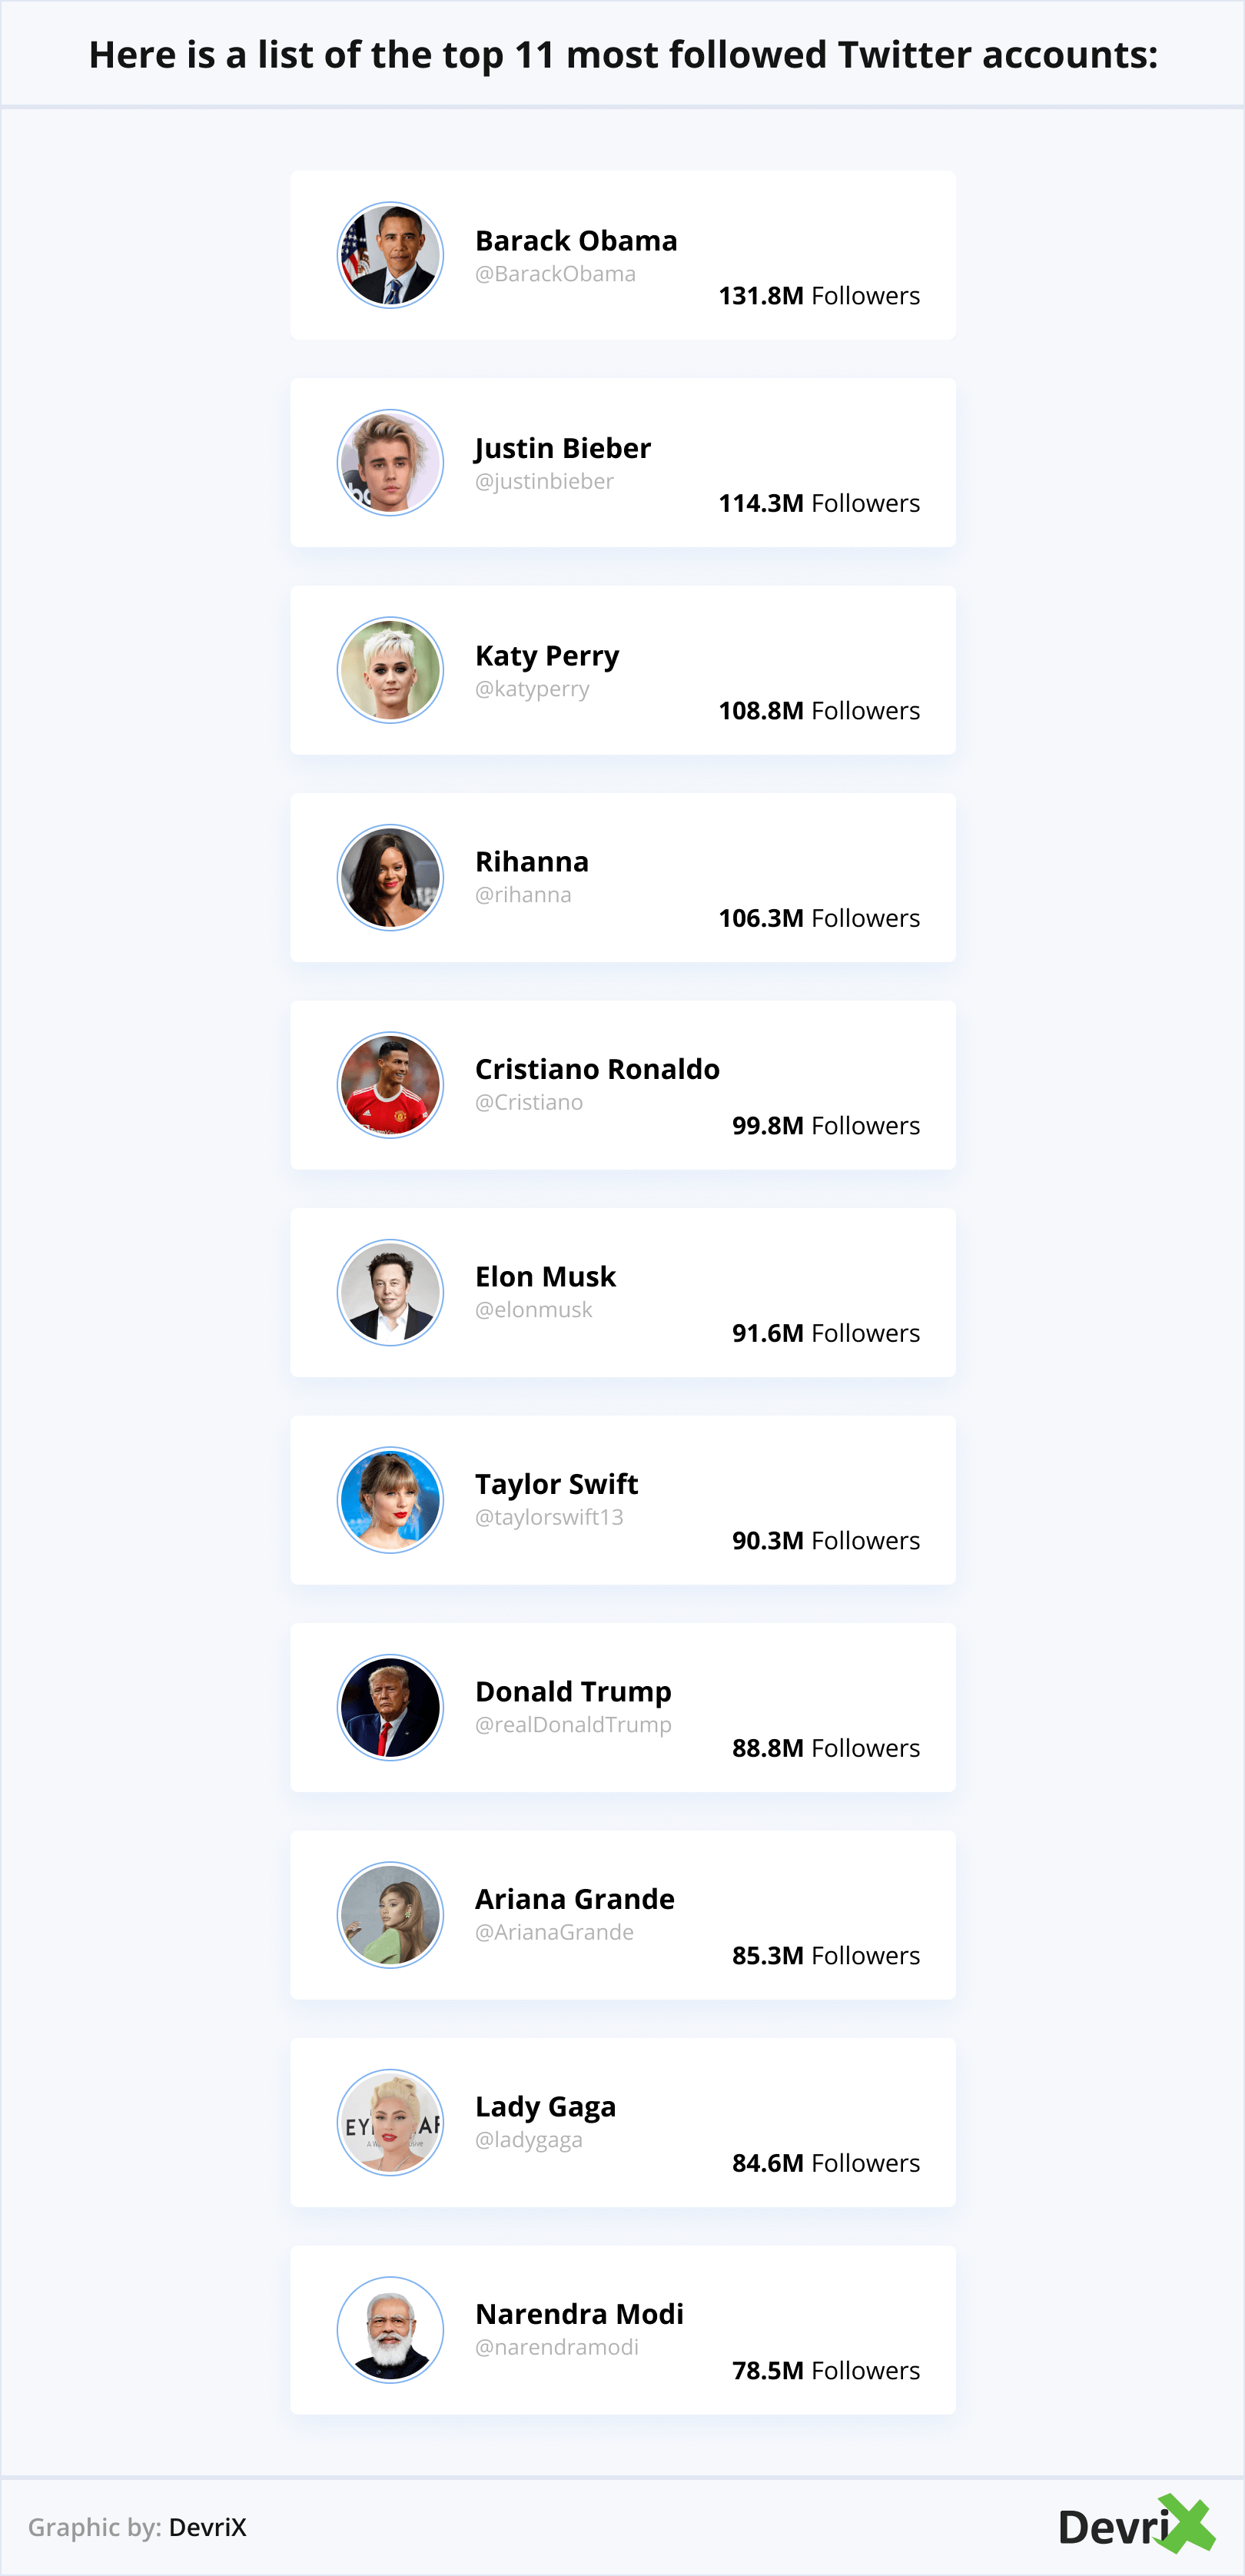 Here is a list of the top 11 most followed Twitter accounts